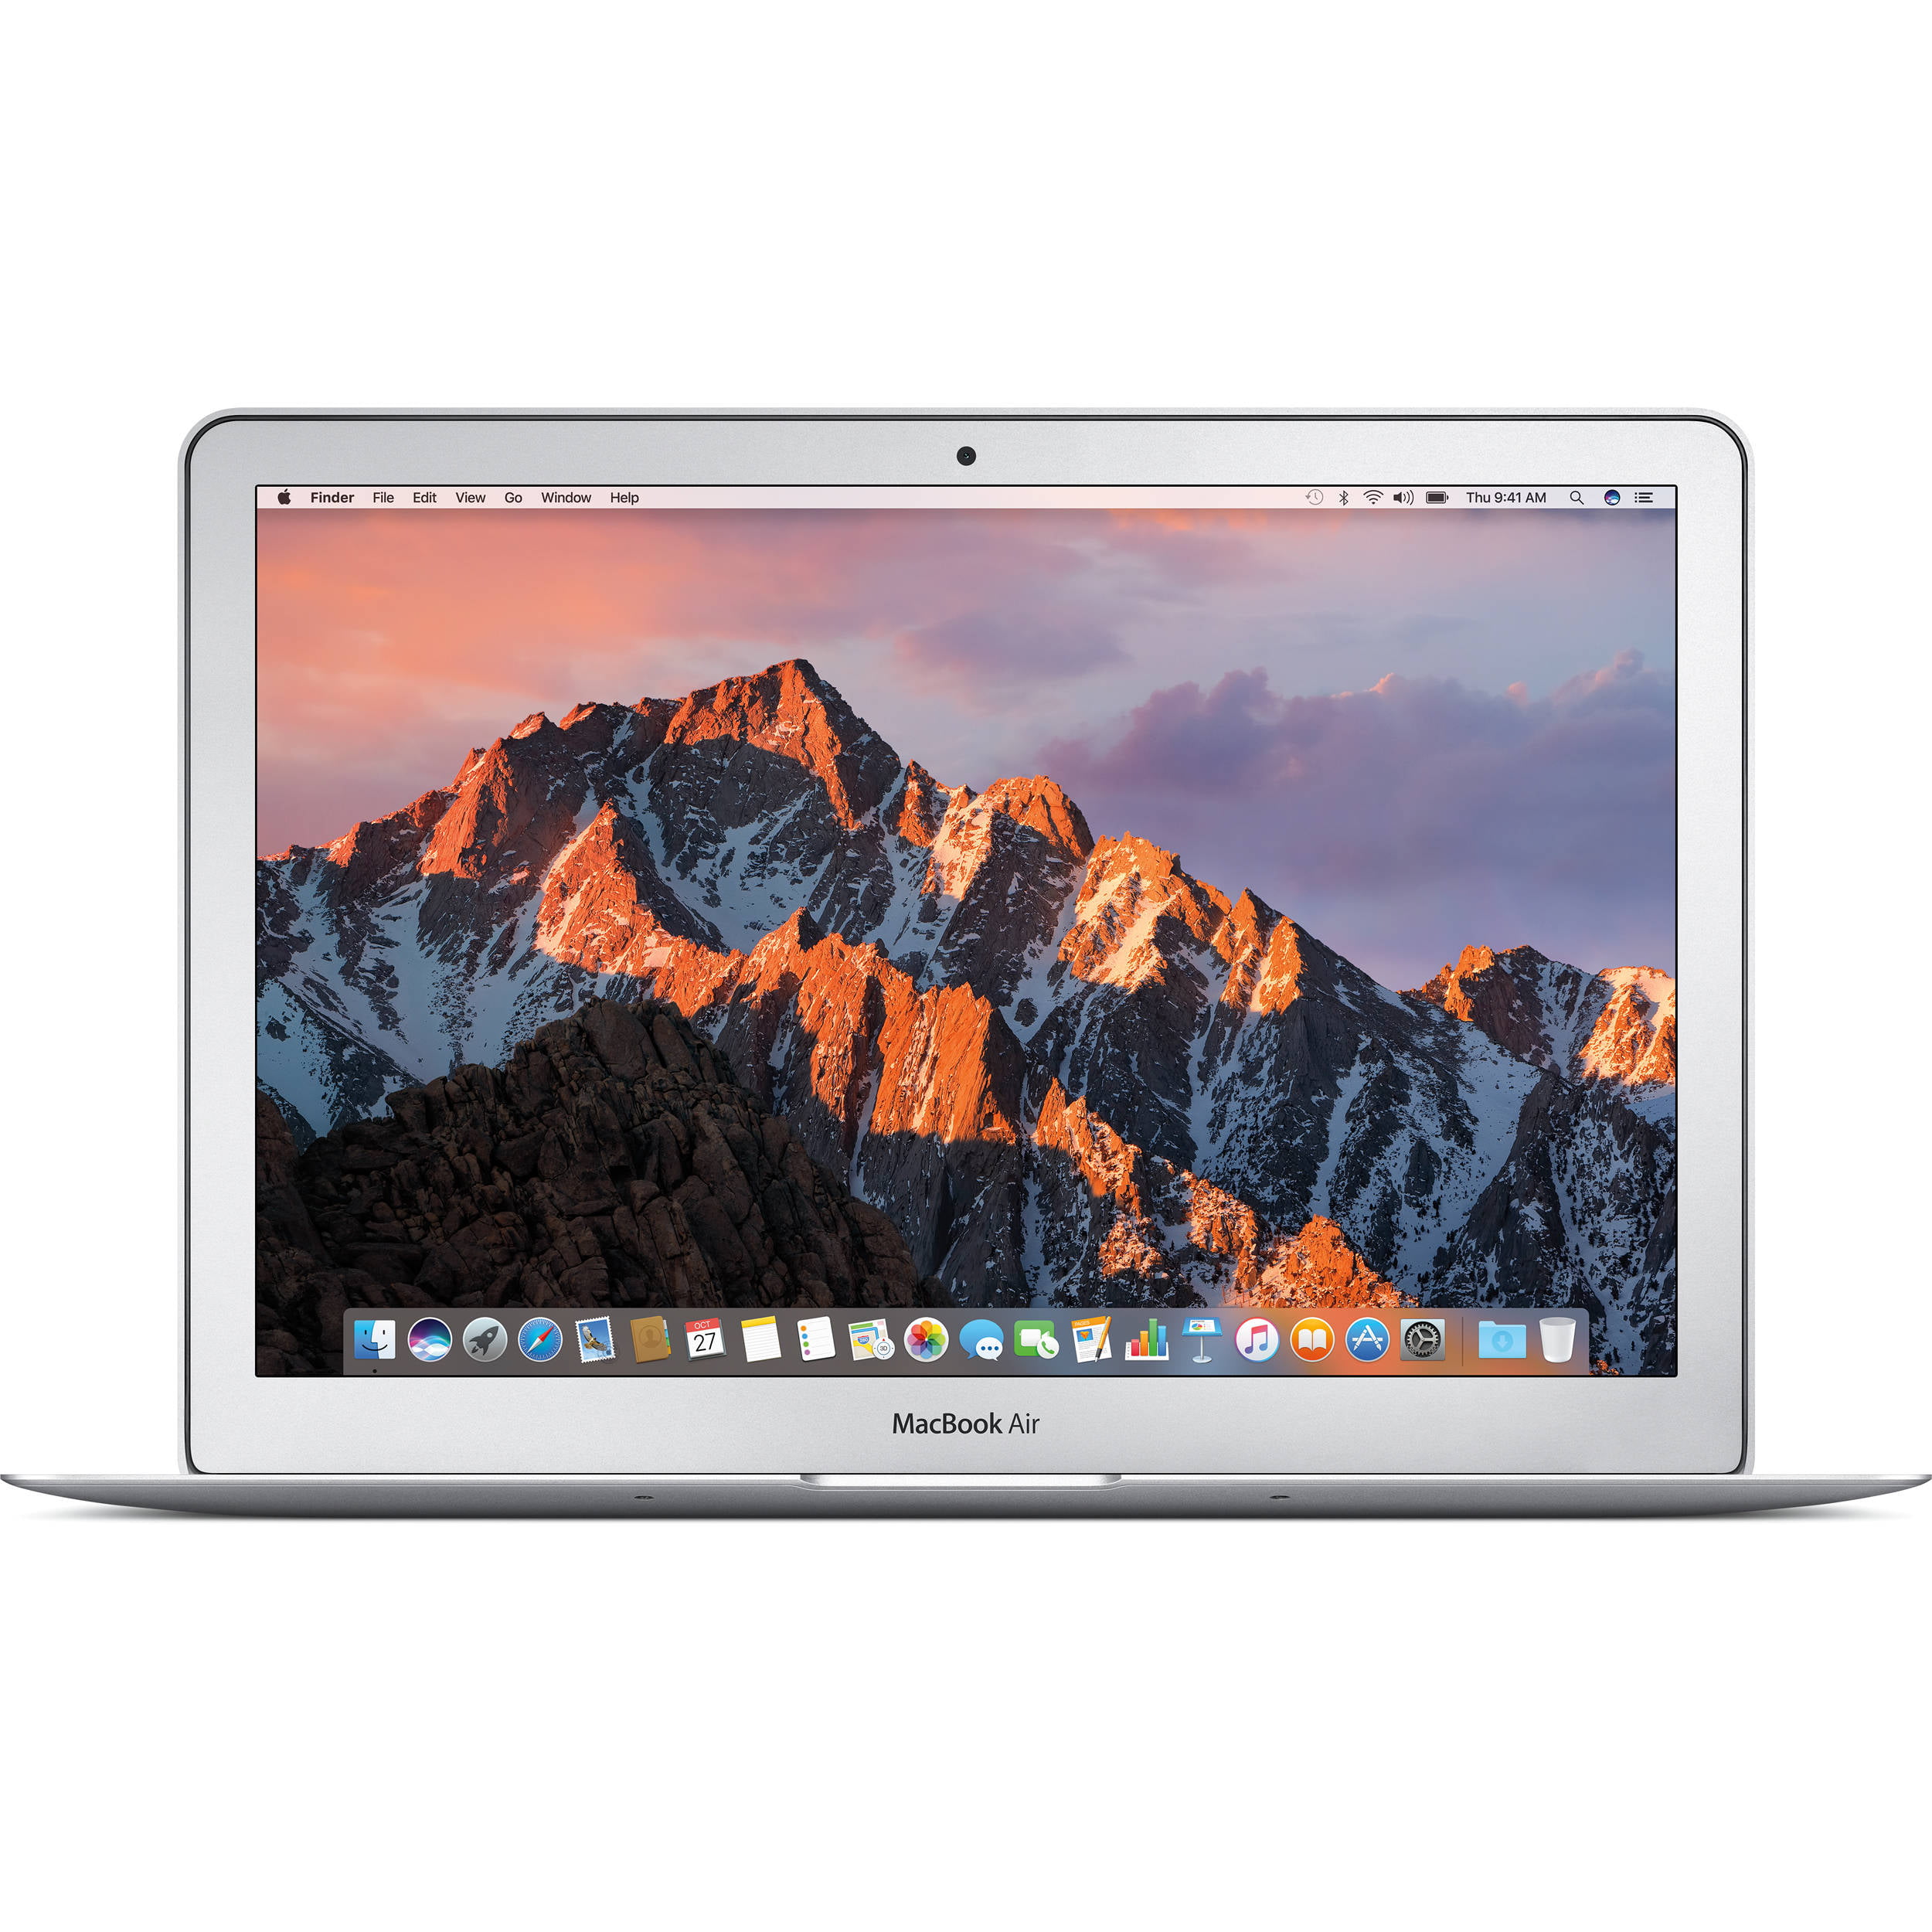 PC/タブレット ノートPC Apple MacBook Air 13 Inch 256GB (2017, Silver) (MQD42LLA) with Mouse + More  (New-Open Box)